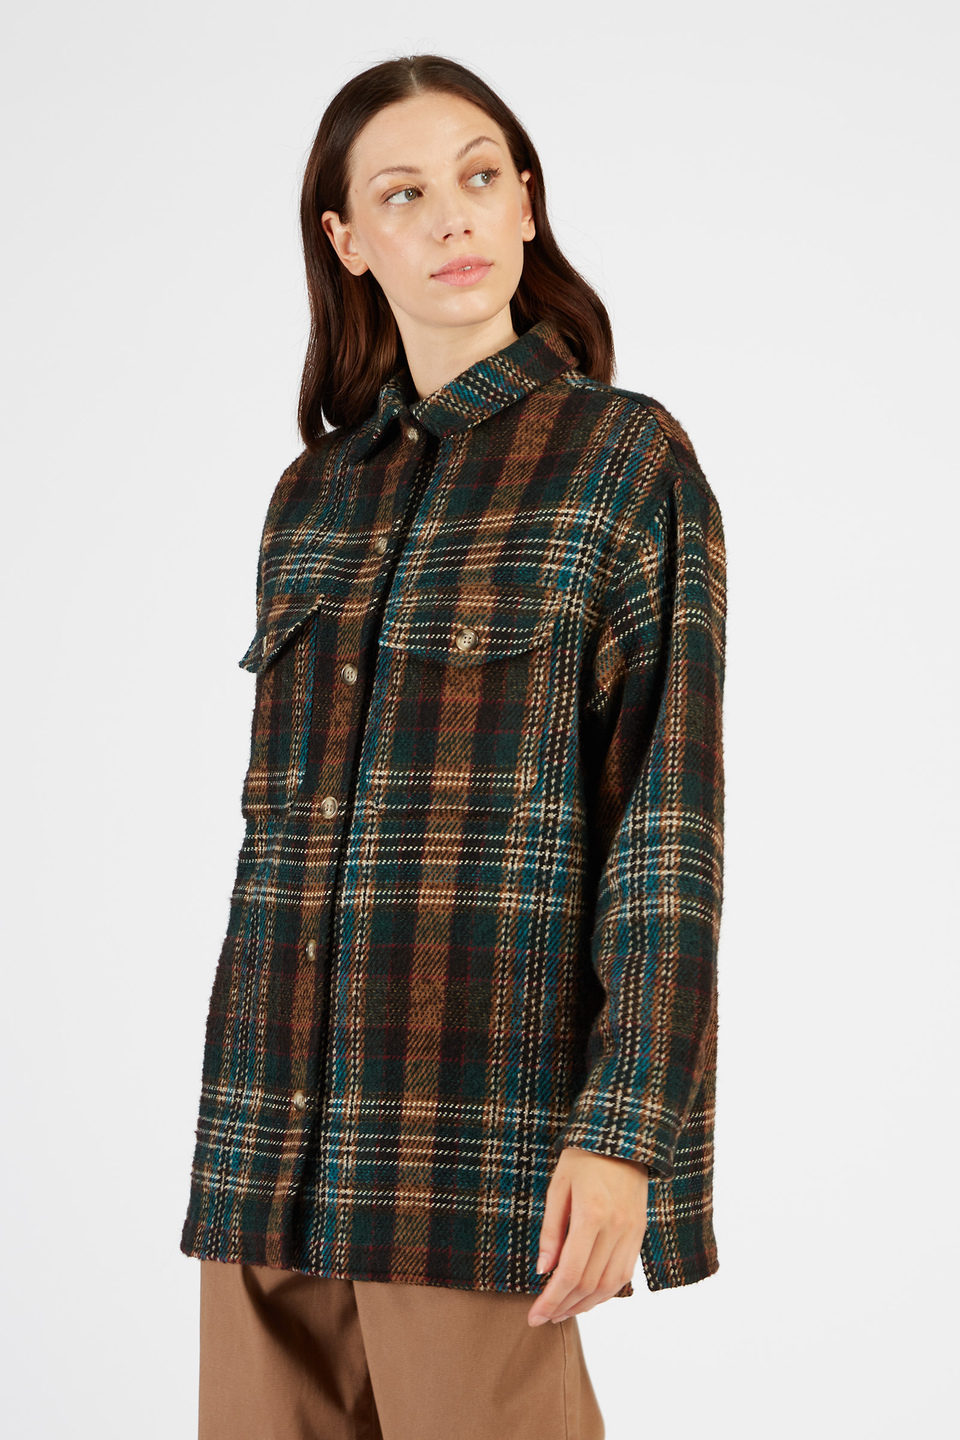 Women’s wool jacket long sleeves checked pattern regular fit | La Martina - Official Online Shop